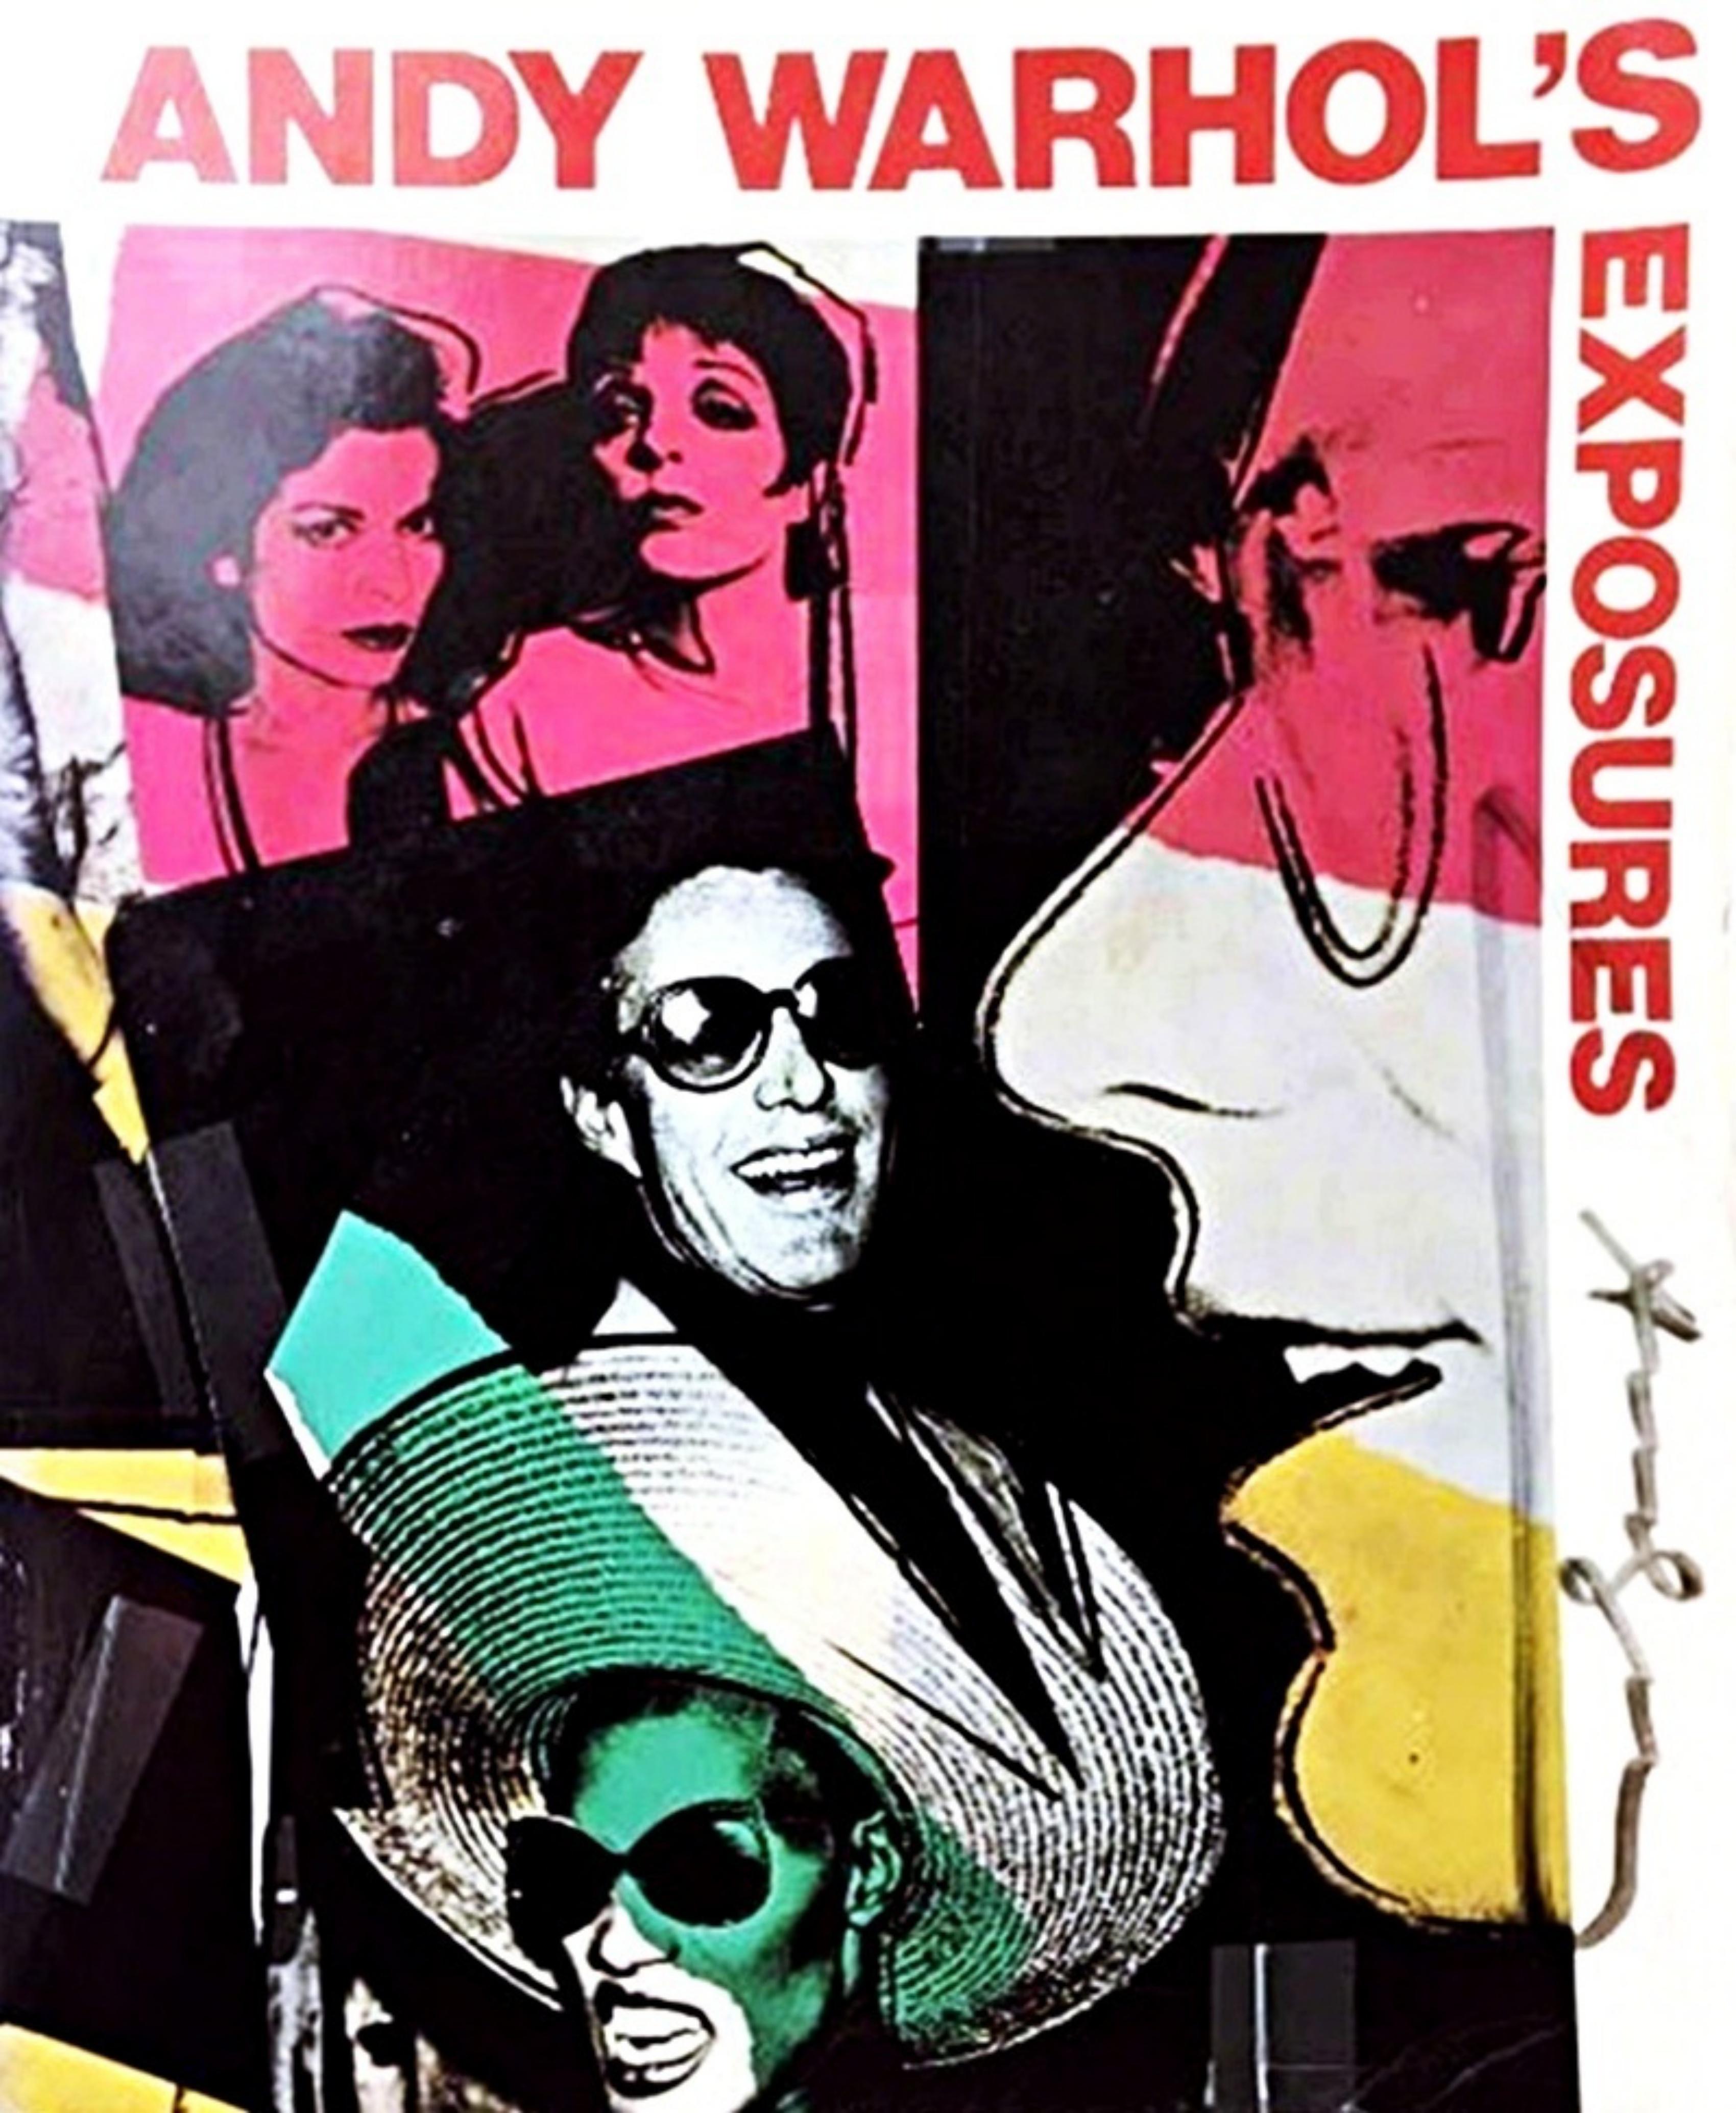 Andy Warhol
Exposures (Hand Signed Twice by Andy Warhol), 1979
Softcover Monograph. Hand Signed Twice by Andy Warhol on the Cover and the Title Page.
Boldly signed TWICE by Andy Warhol in black marker on the front cover and on the upper title